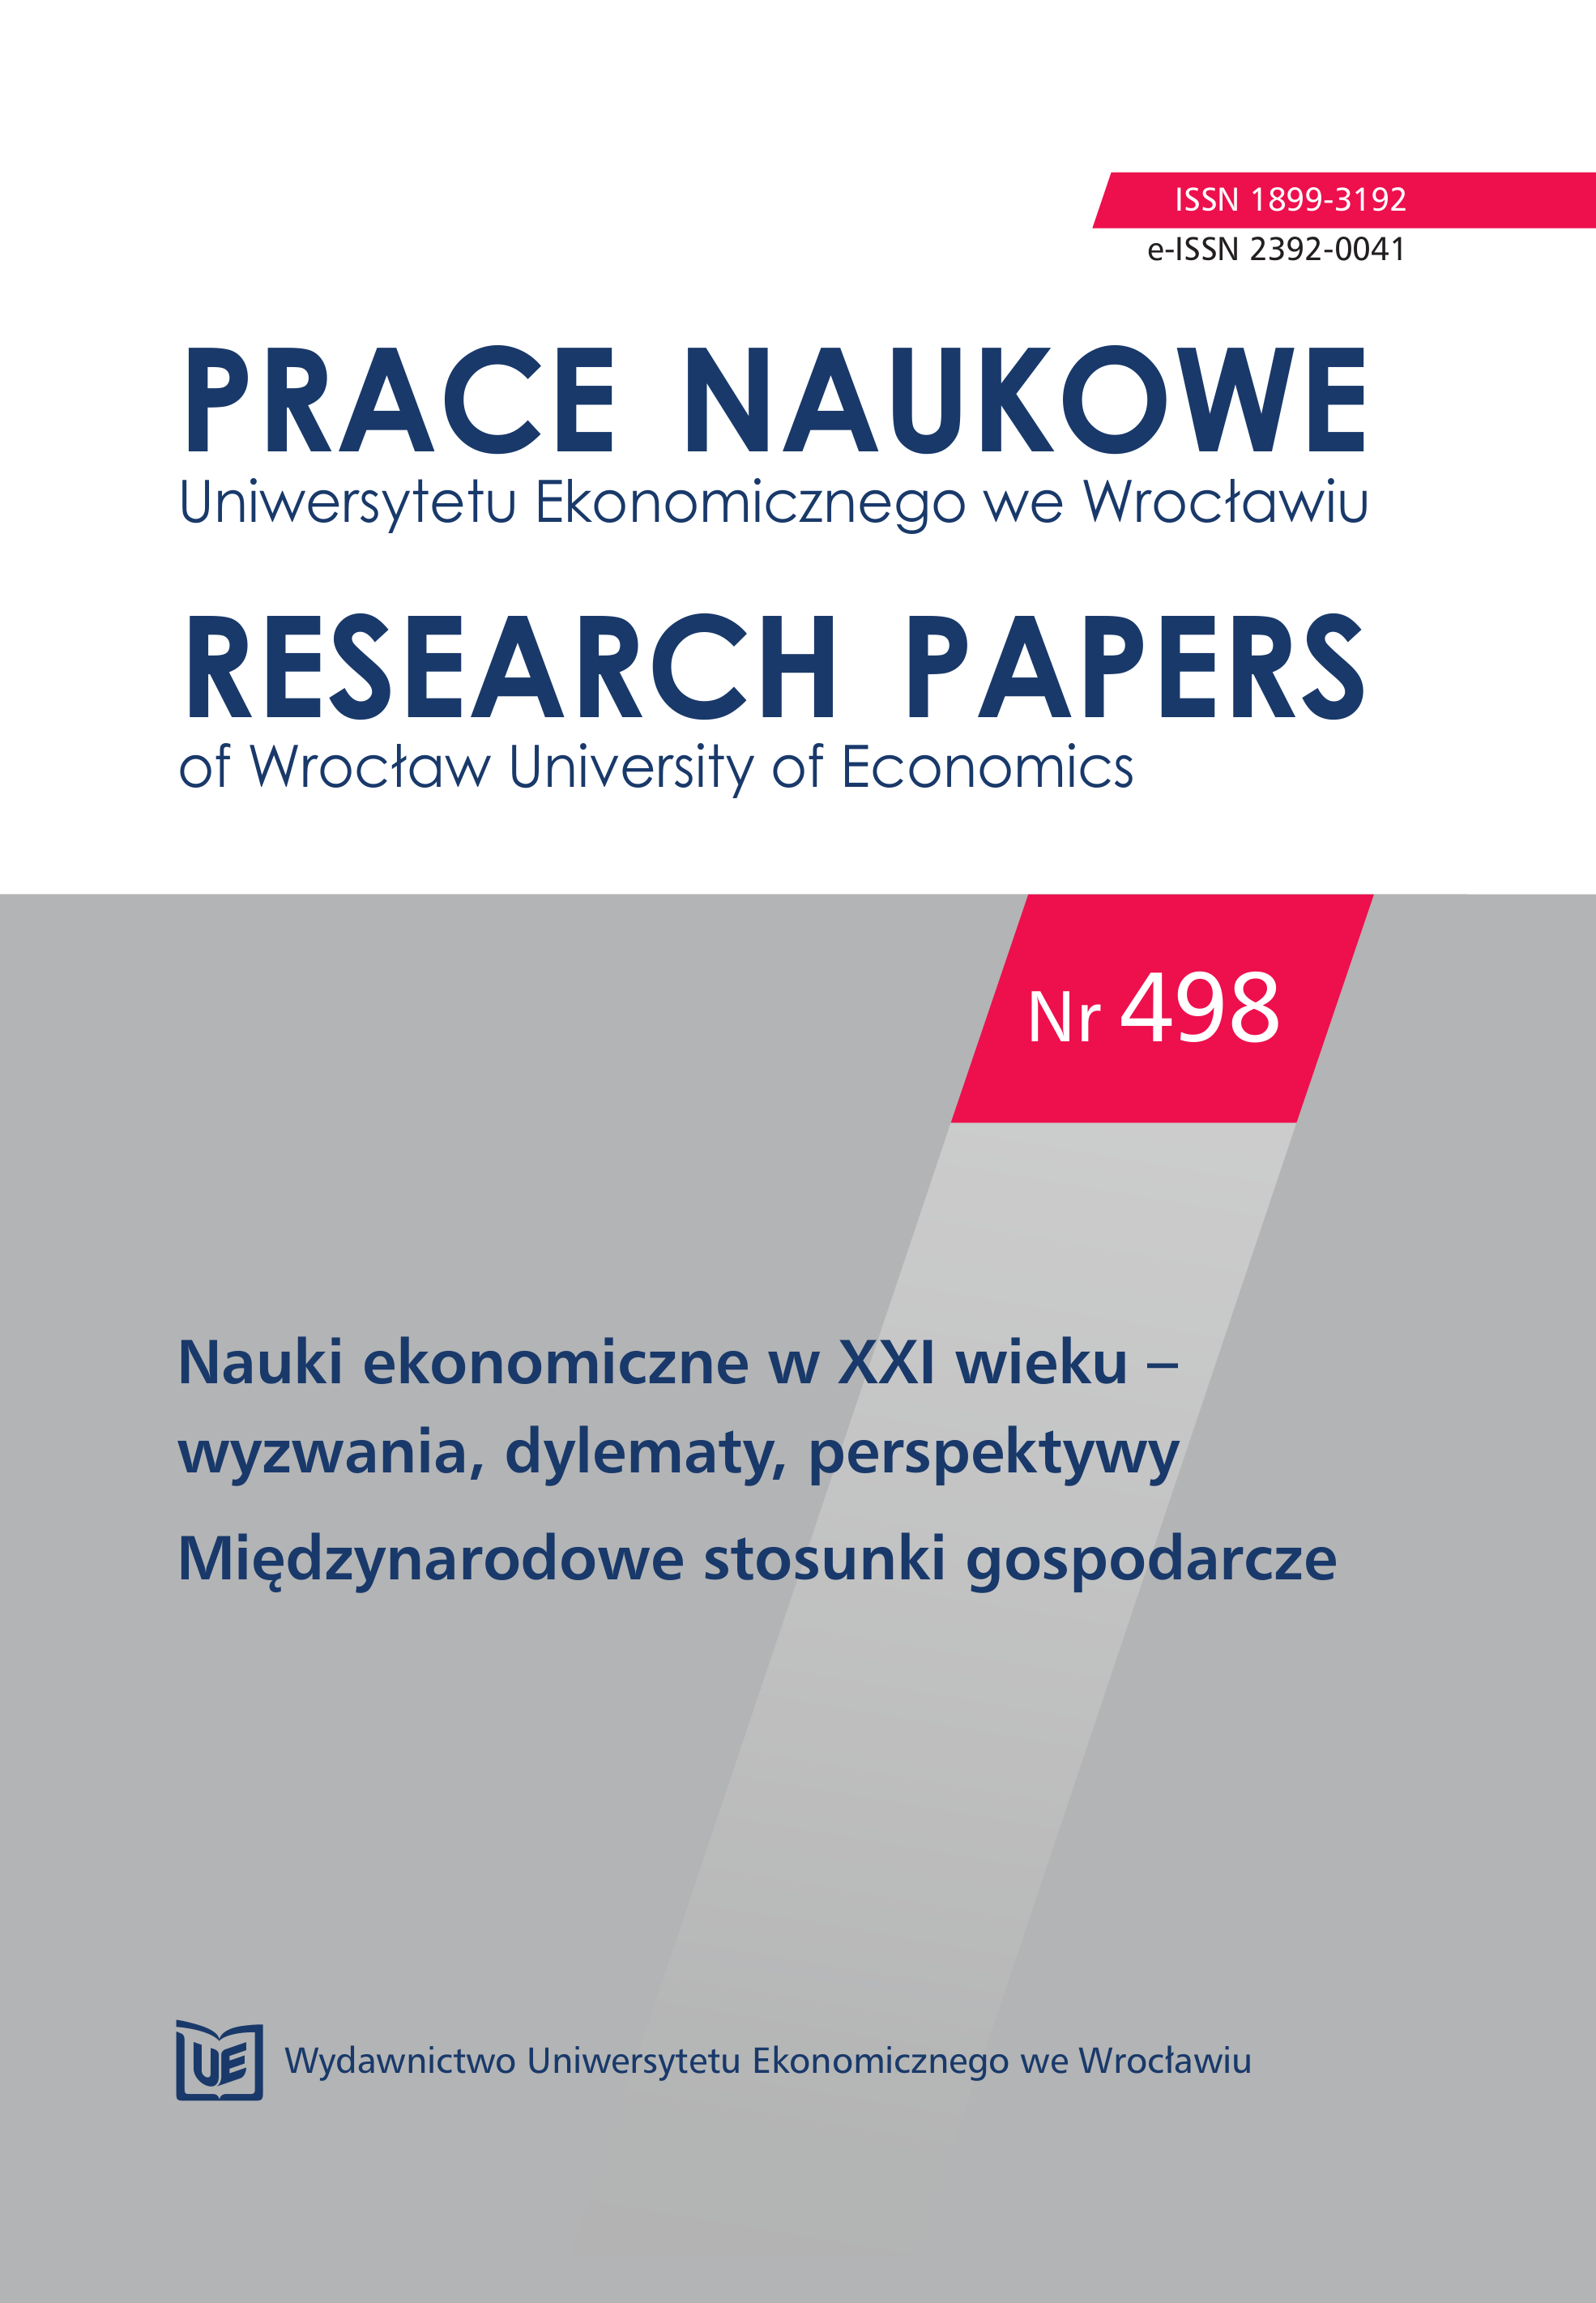 Balance of benefits and risks in foreign trade for Polish enterprises on non-European markets Cover Image